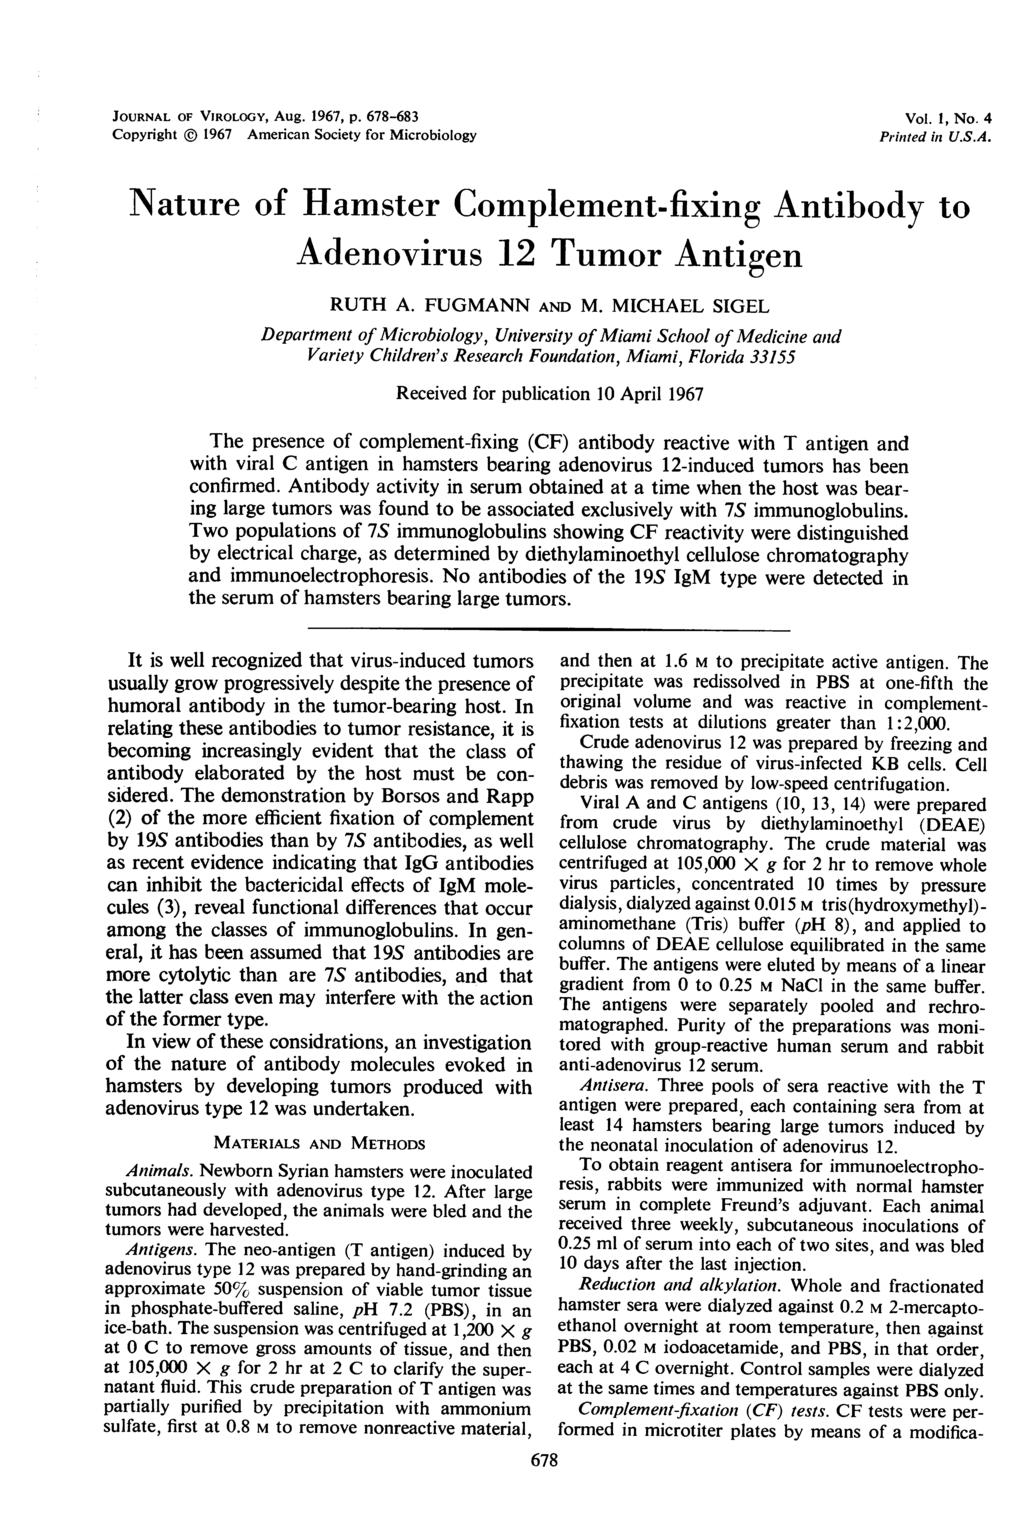 JOURNAL OF VIROLOGY, Aug. 1967, p. 678-683 Copyright 1967 American Society for Microbiology Vol. 1, No. Printed in U.S.A. Nature of Hamster Complement-fixing Antibody to Adenovirus 12 Tumor Antigen RUTH A.